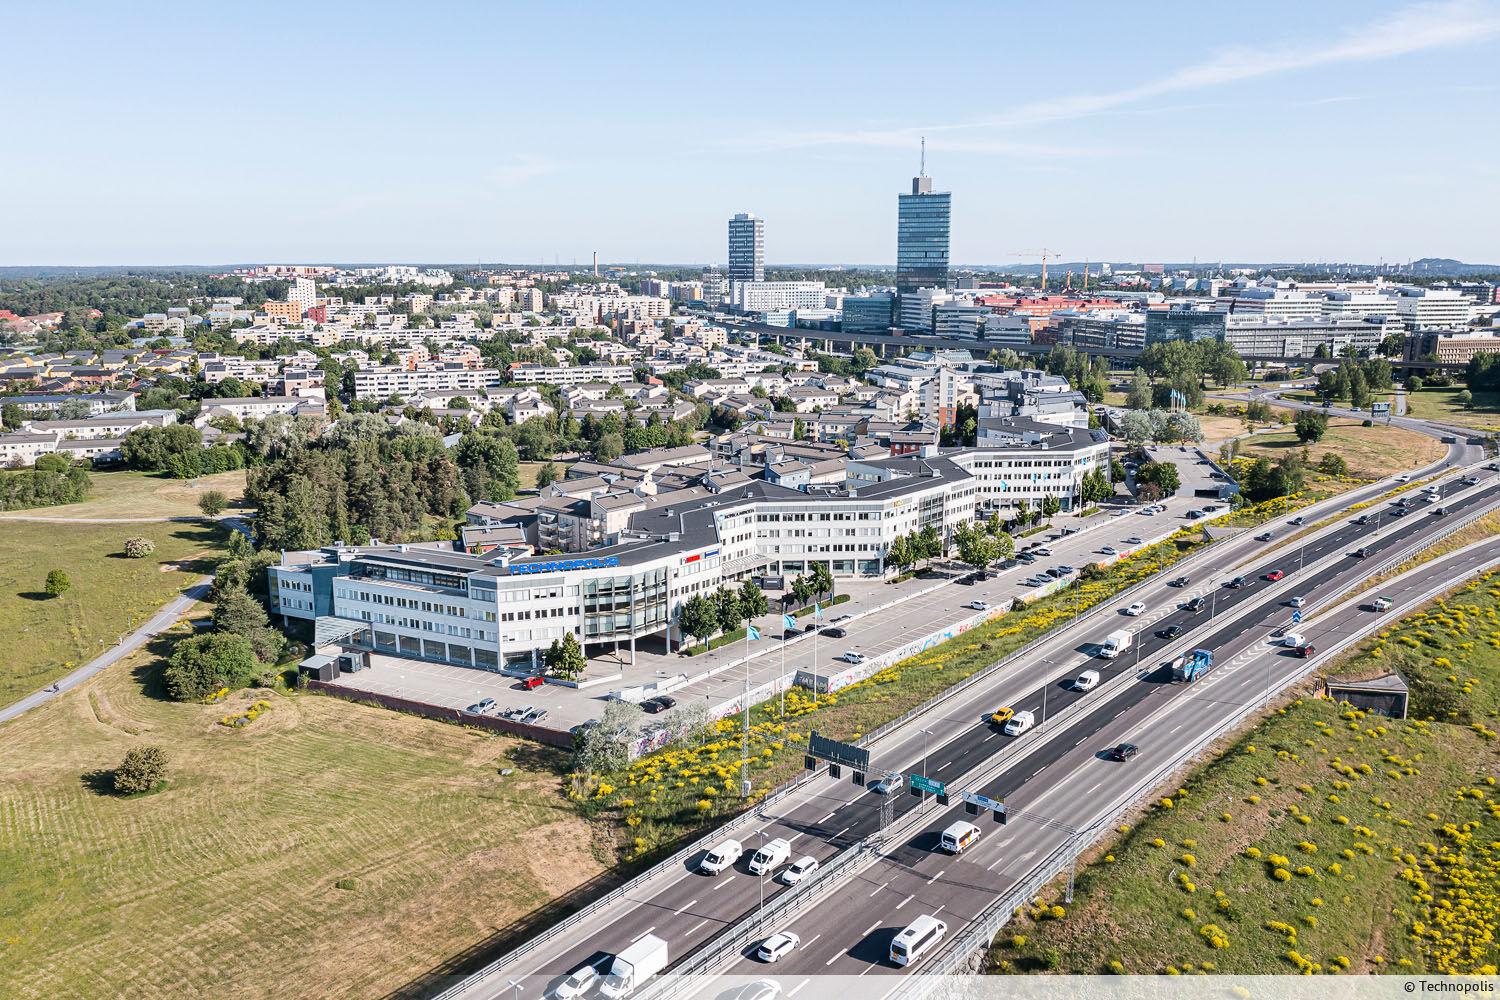 This office space is located on the third floor of the Kista 2 building on the Technopolis Kista campus. This space consists of office rooms and open space.